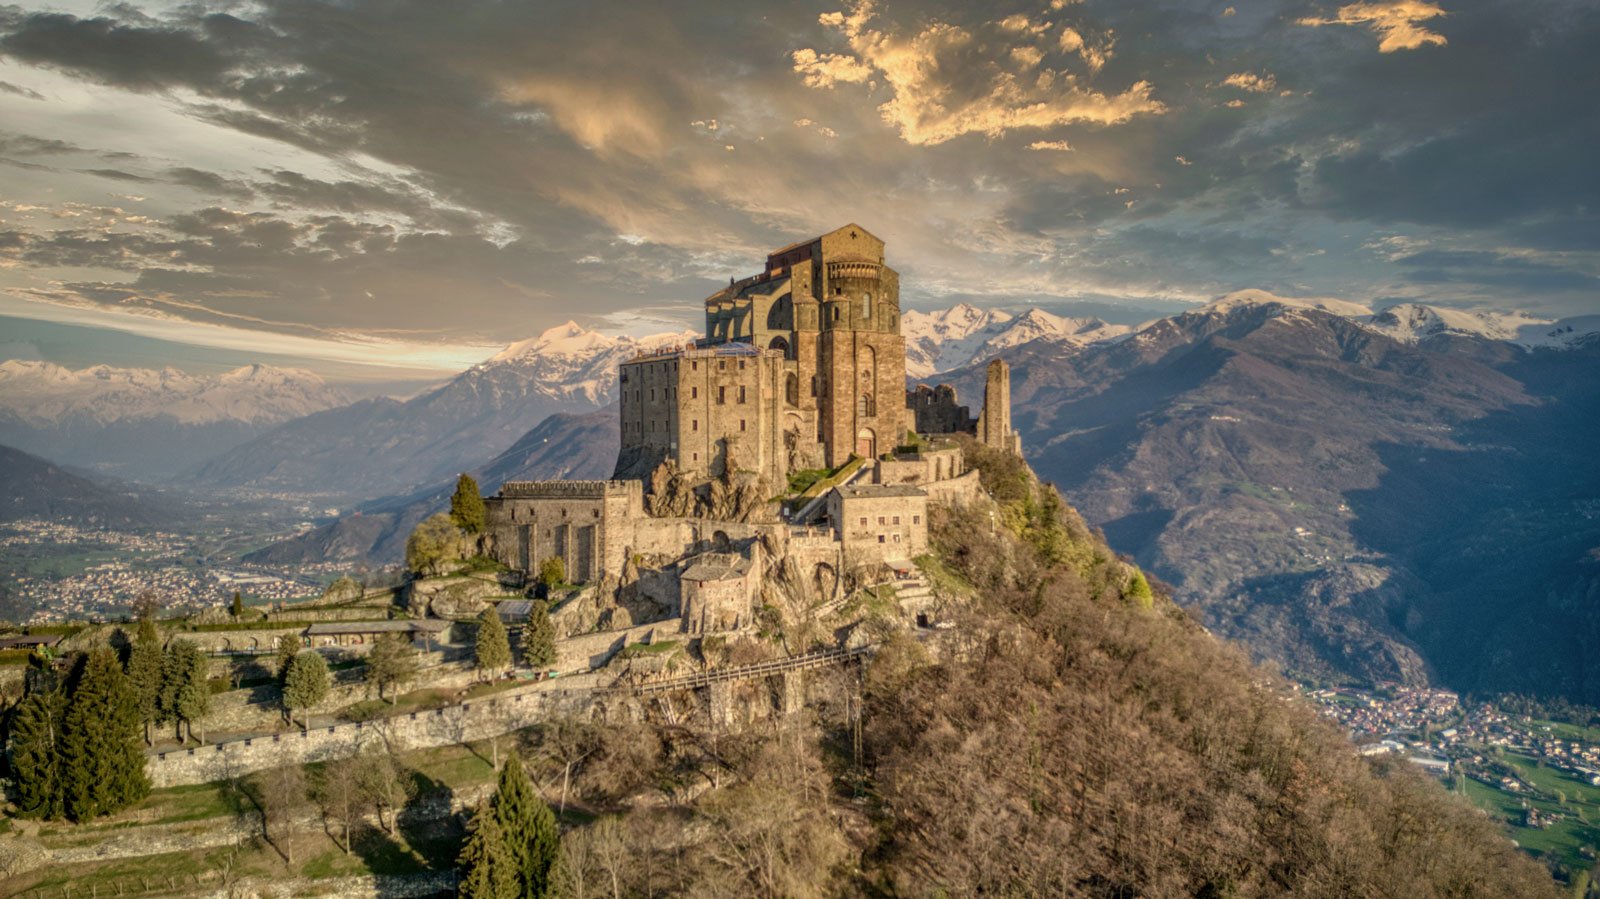 The Sacra di San Michele, with its magnificent alpine setting